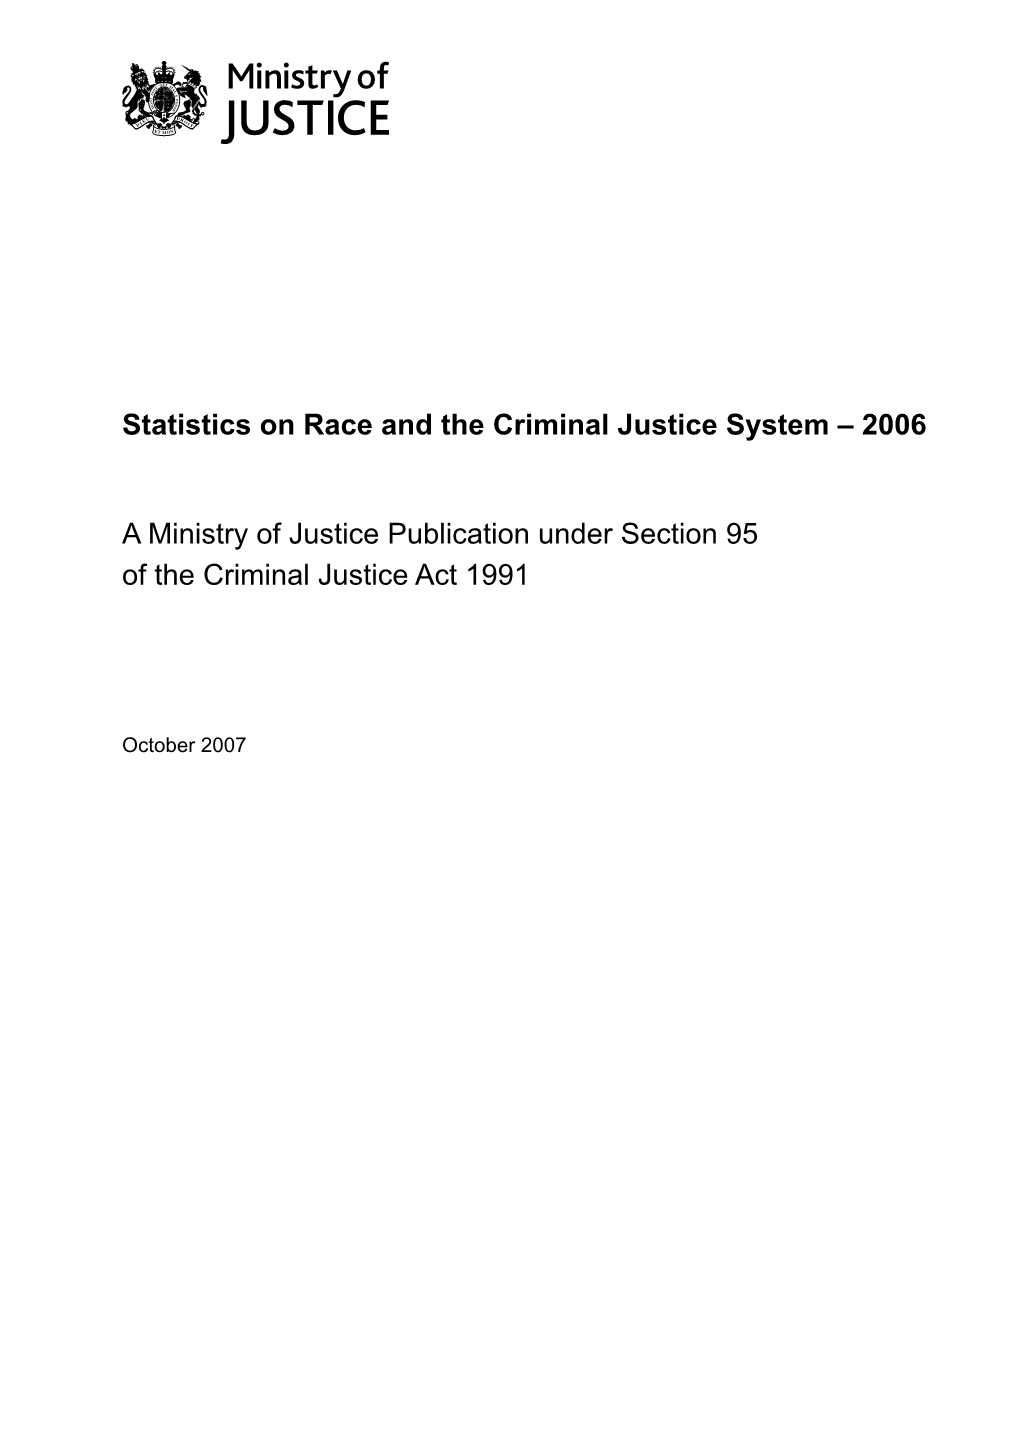 Statistics on Race and the Criminal Justice System – 2006